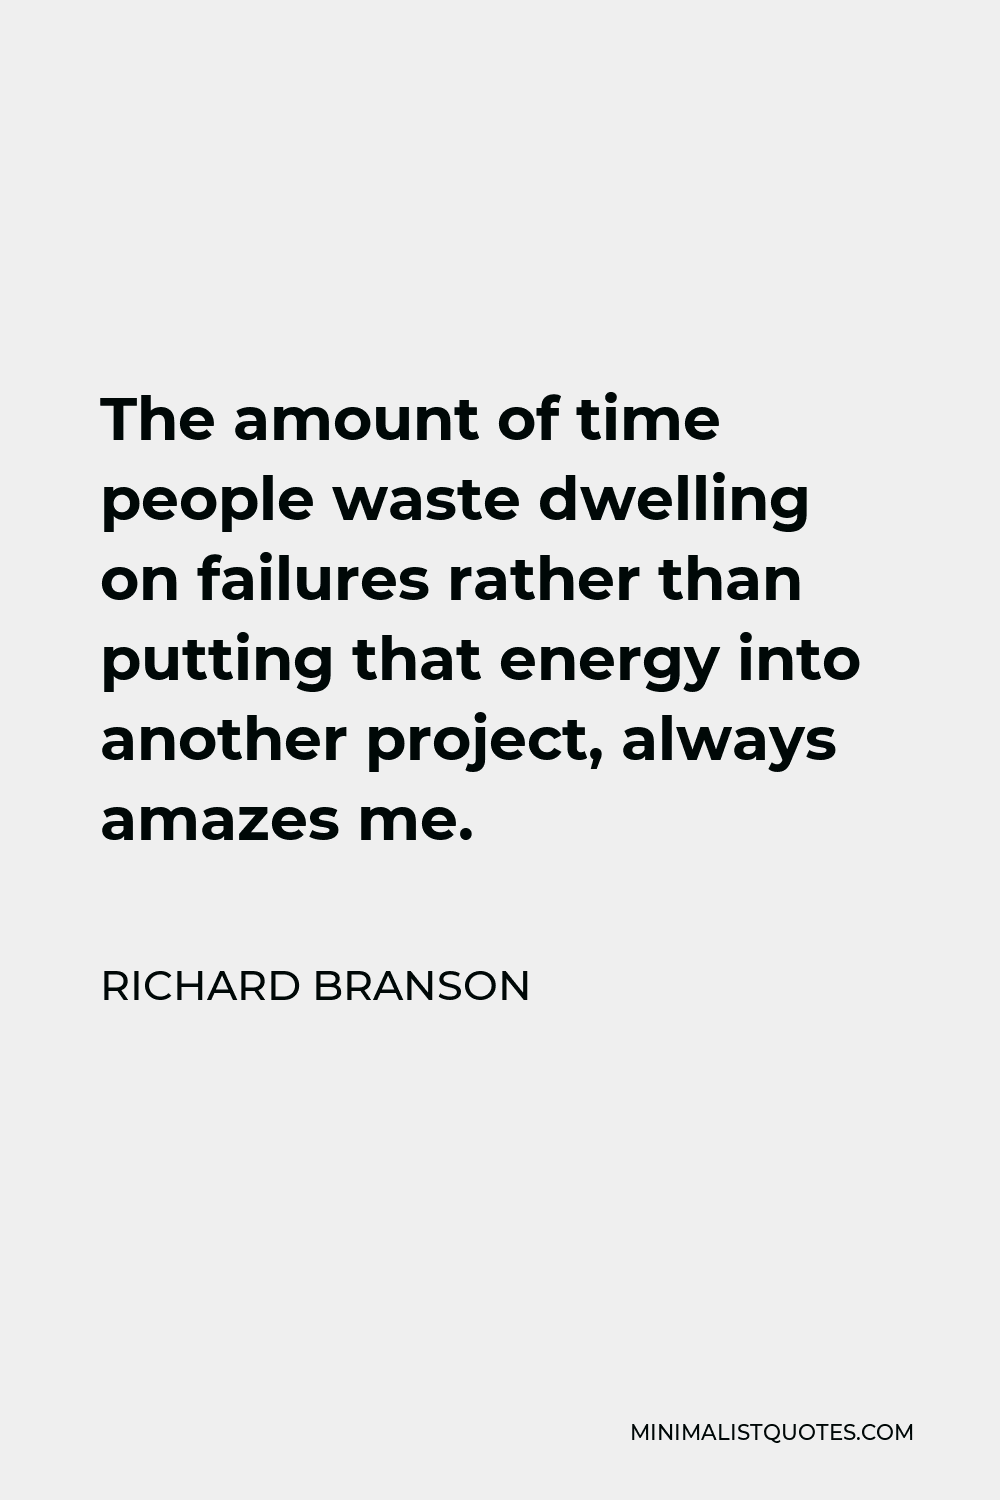 Richard Branson Quote - The amount of time people waste dwelling on failures rather than putting that energy into another project, always amazes me.